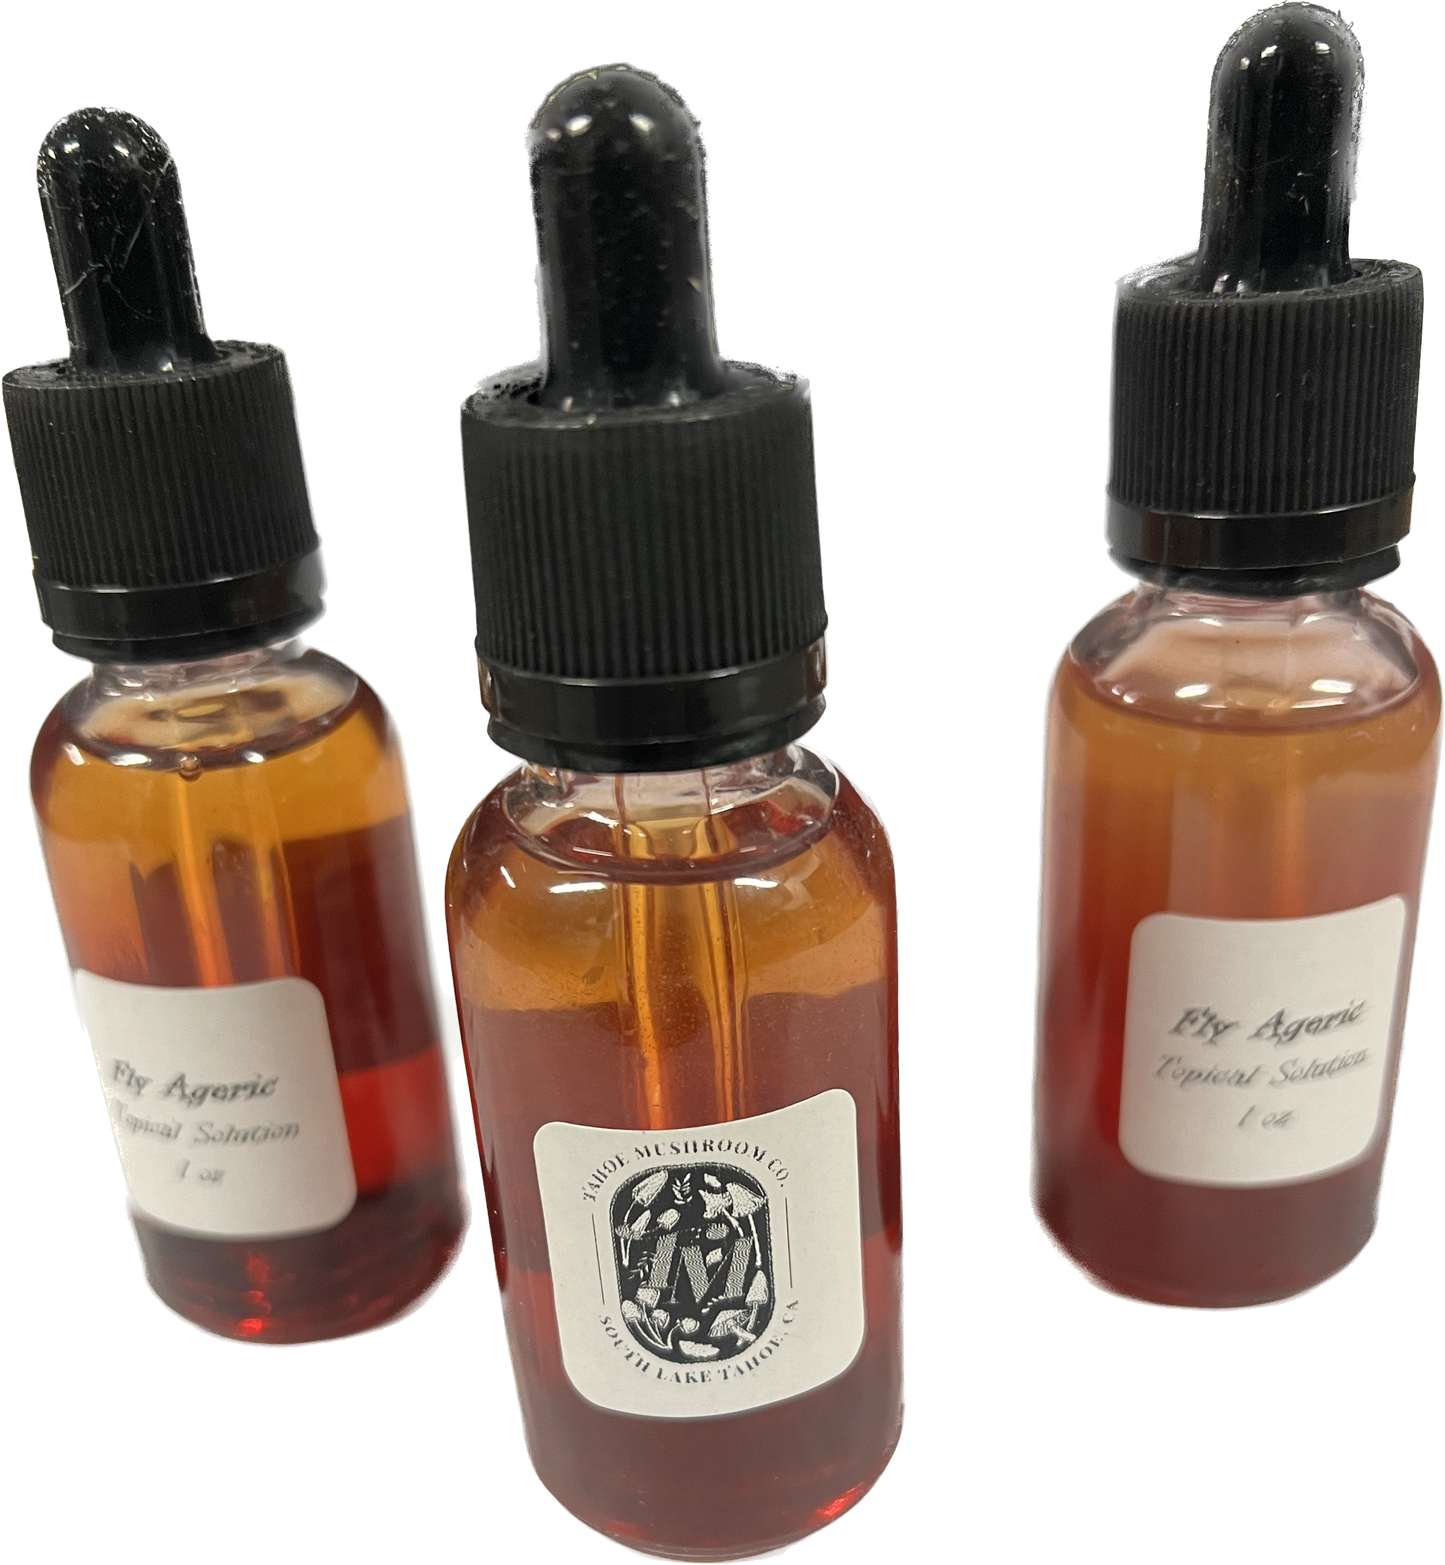 Fly Ageric Tincture